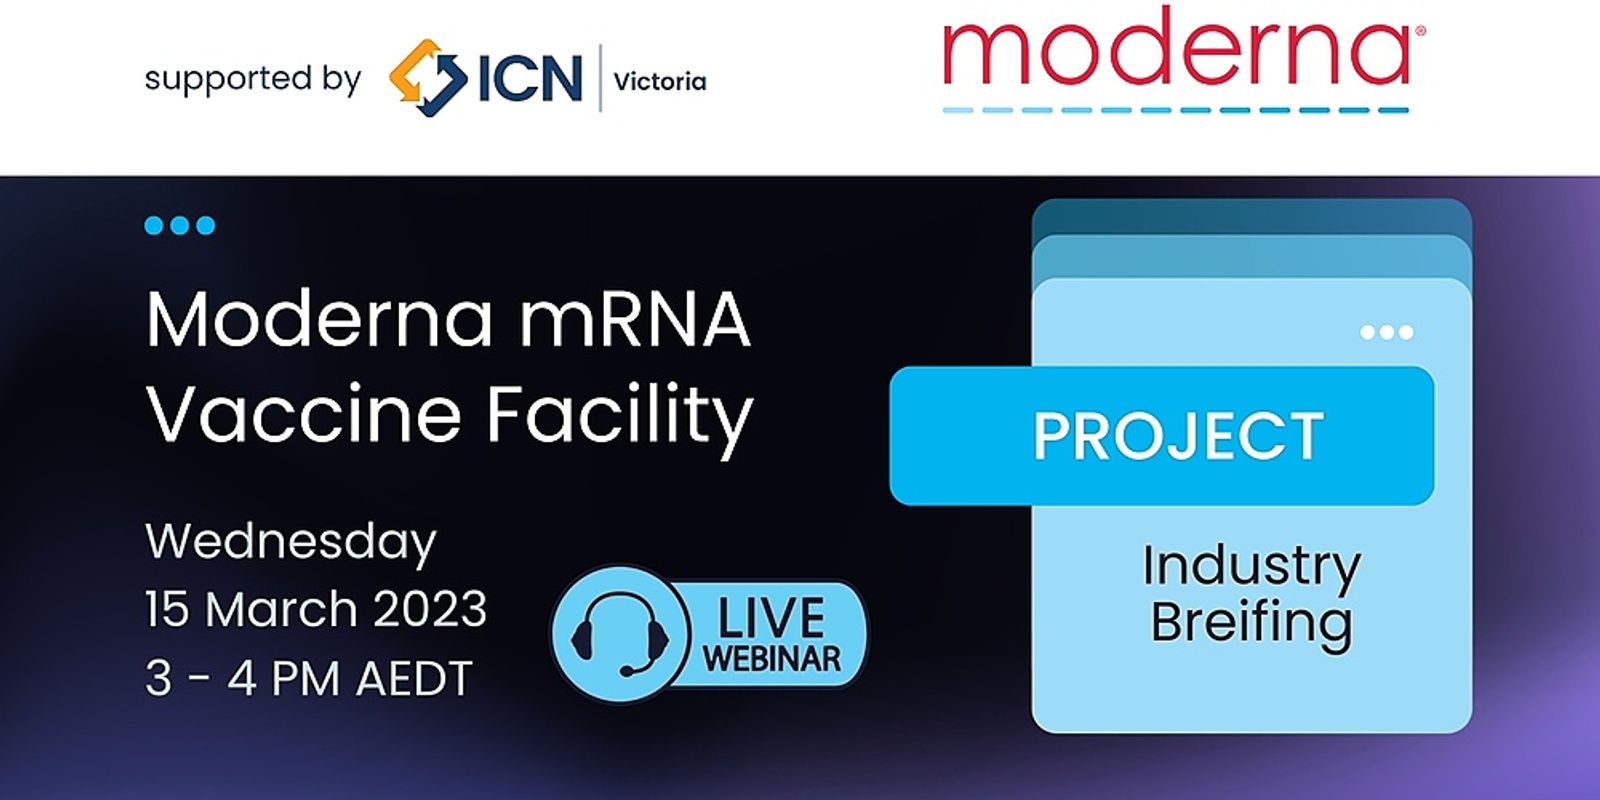 Project Industry Briefing: Moderna mRNA Vaccine Facility